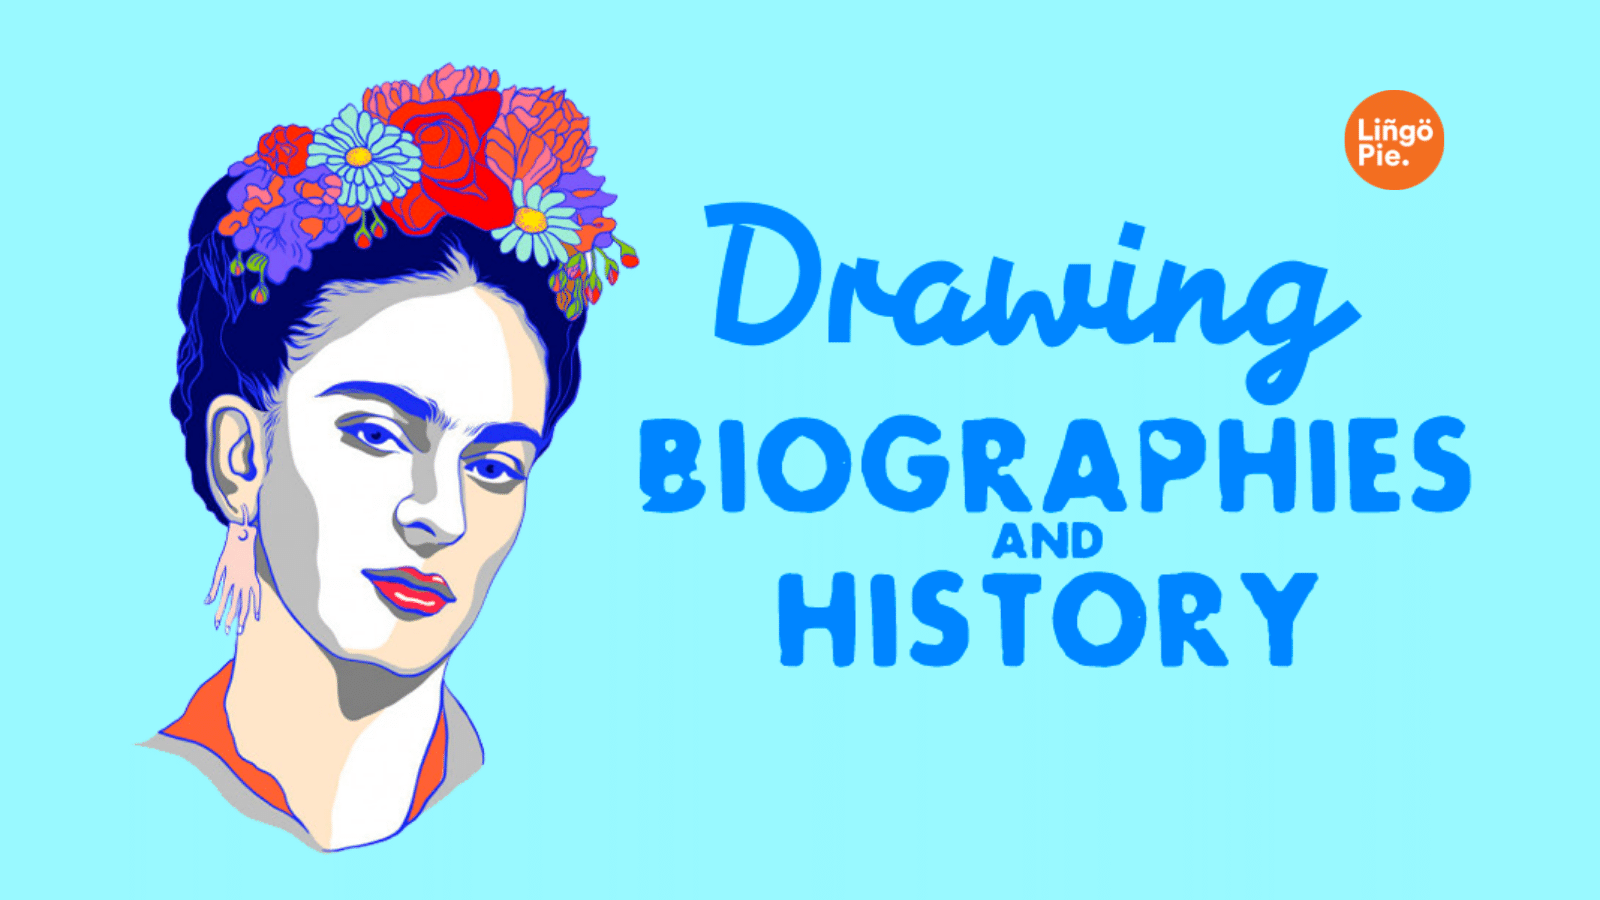 Drawing Biographies and History on Lingopie